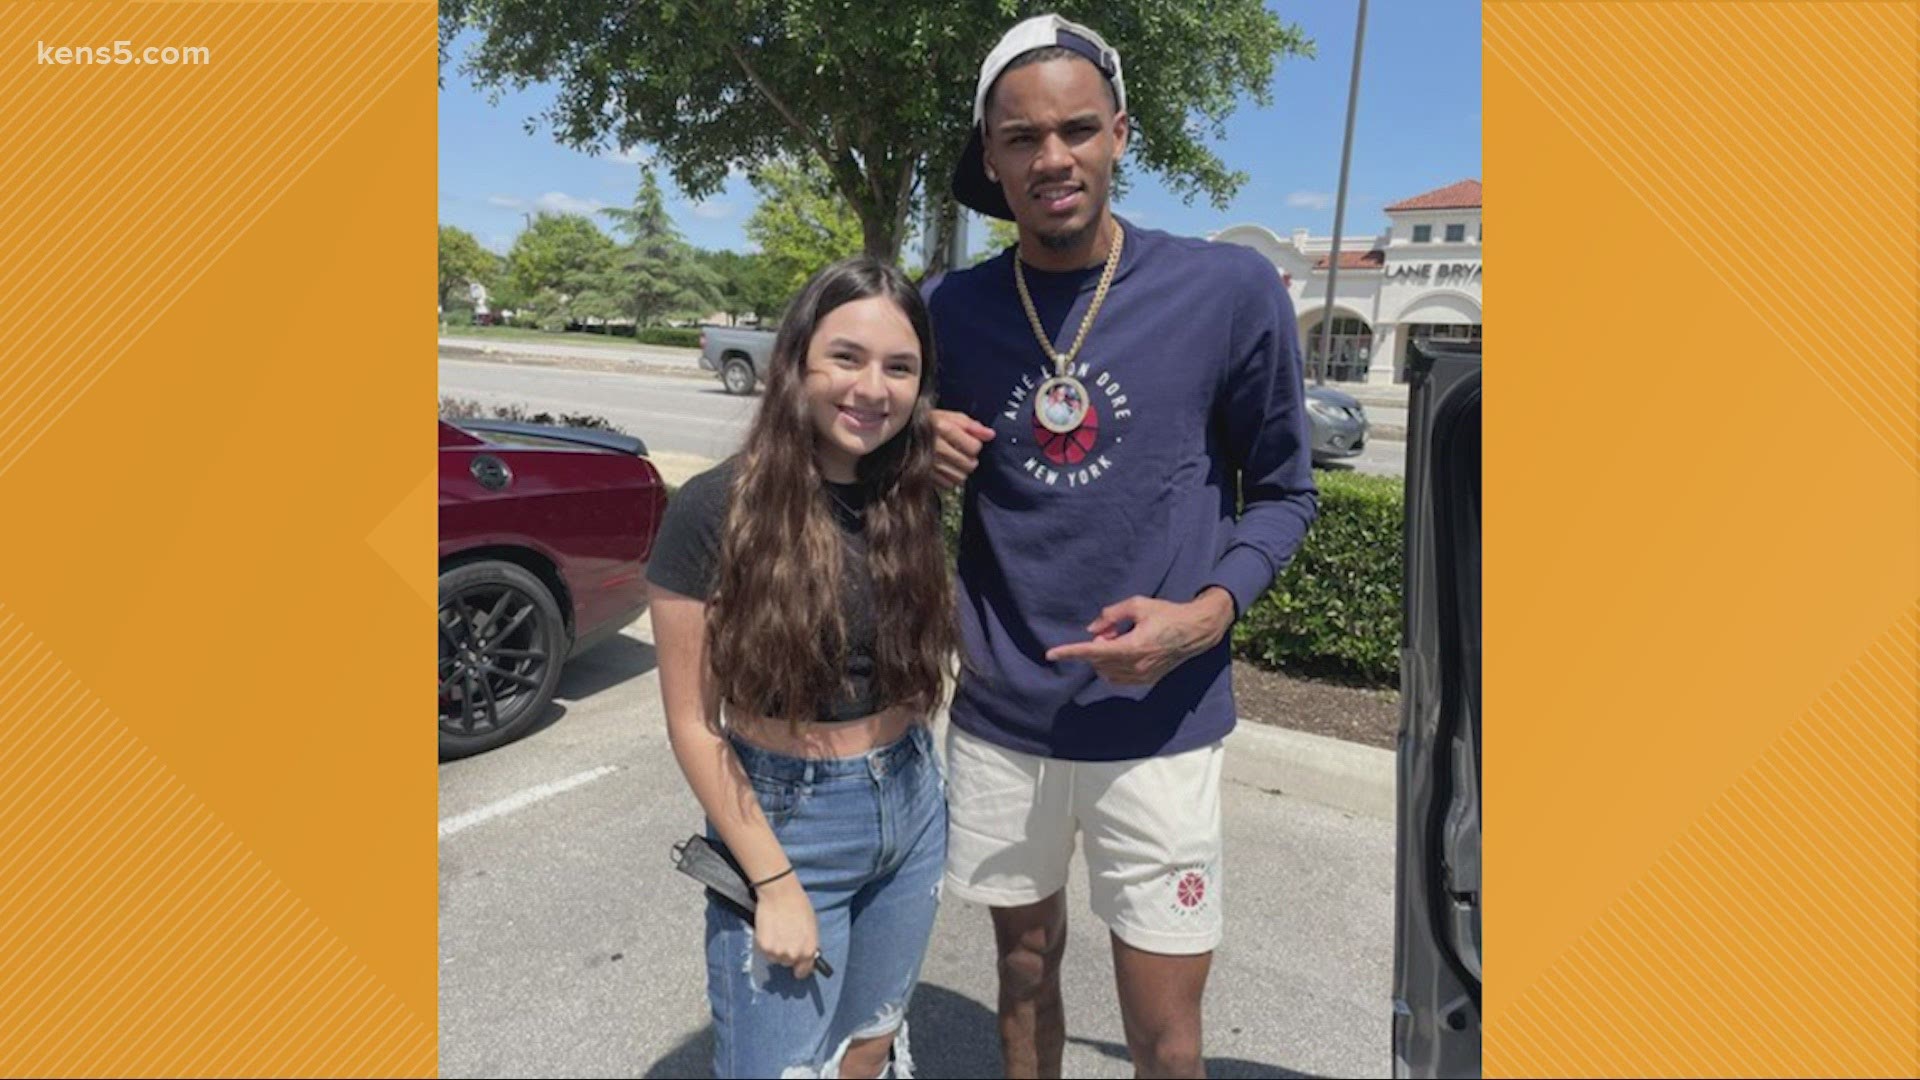 The Spurs standout responded to the tweet, meeting up with the fan in the afternoon to provide a lasting memory.